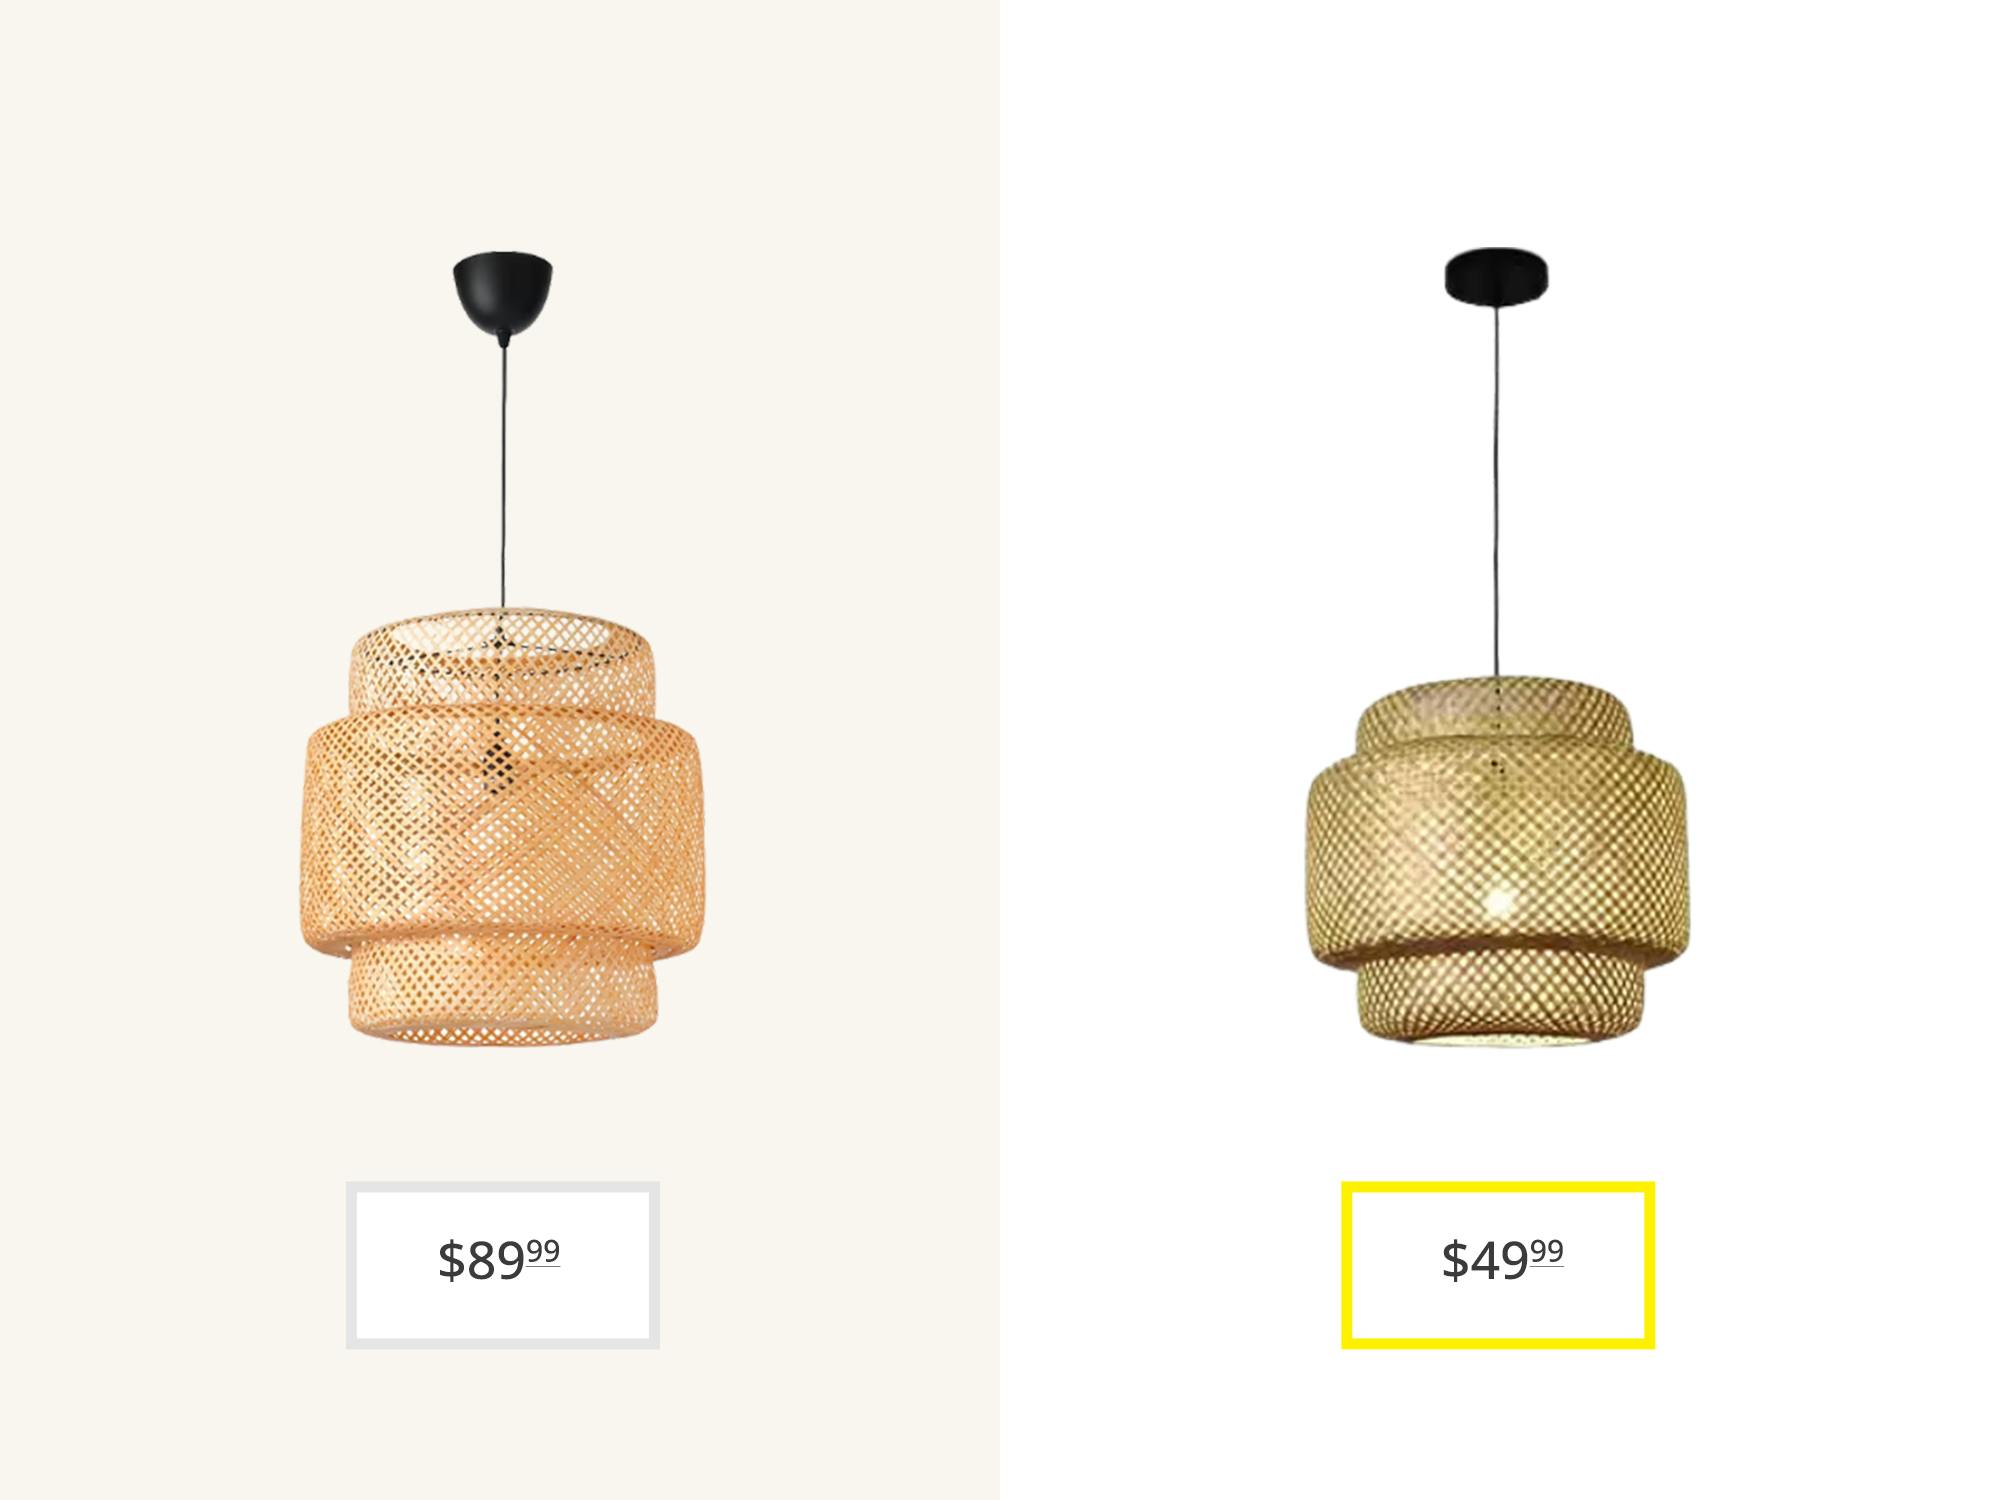 A Bamboo hanging light fixture from IKEA compared to a similar one from Aldi